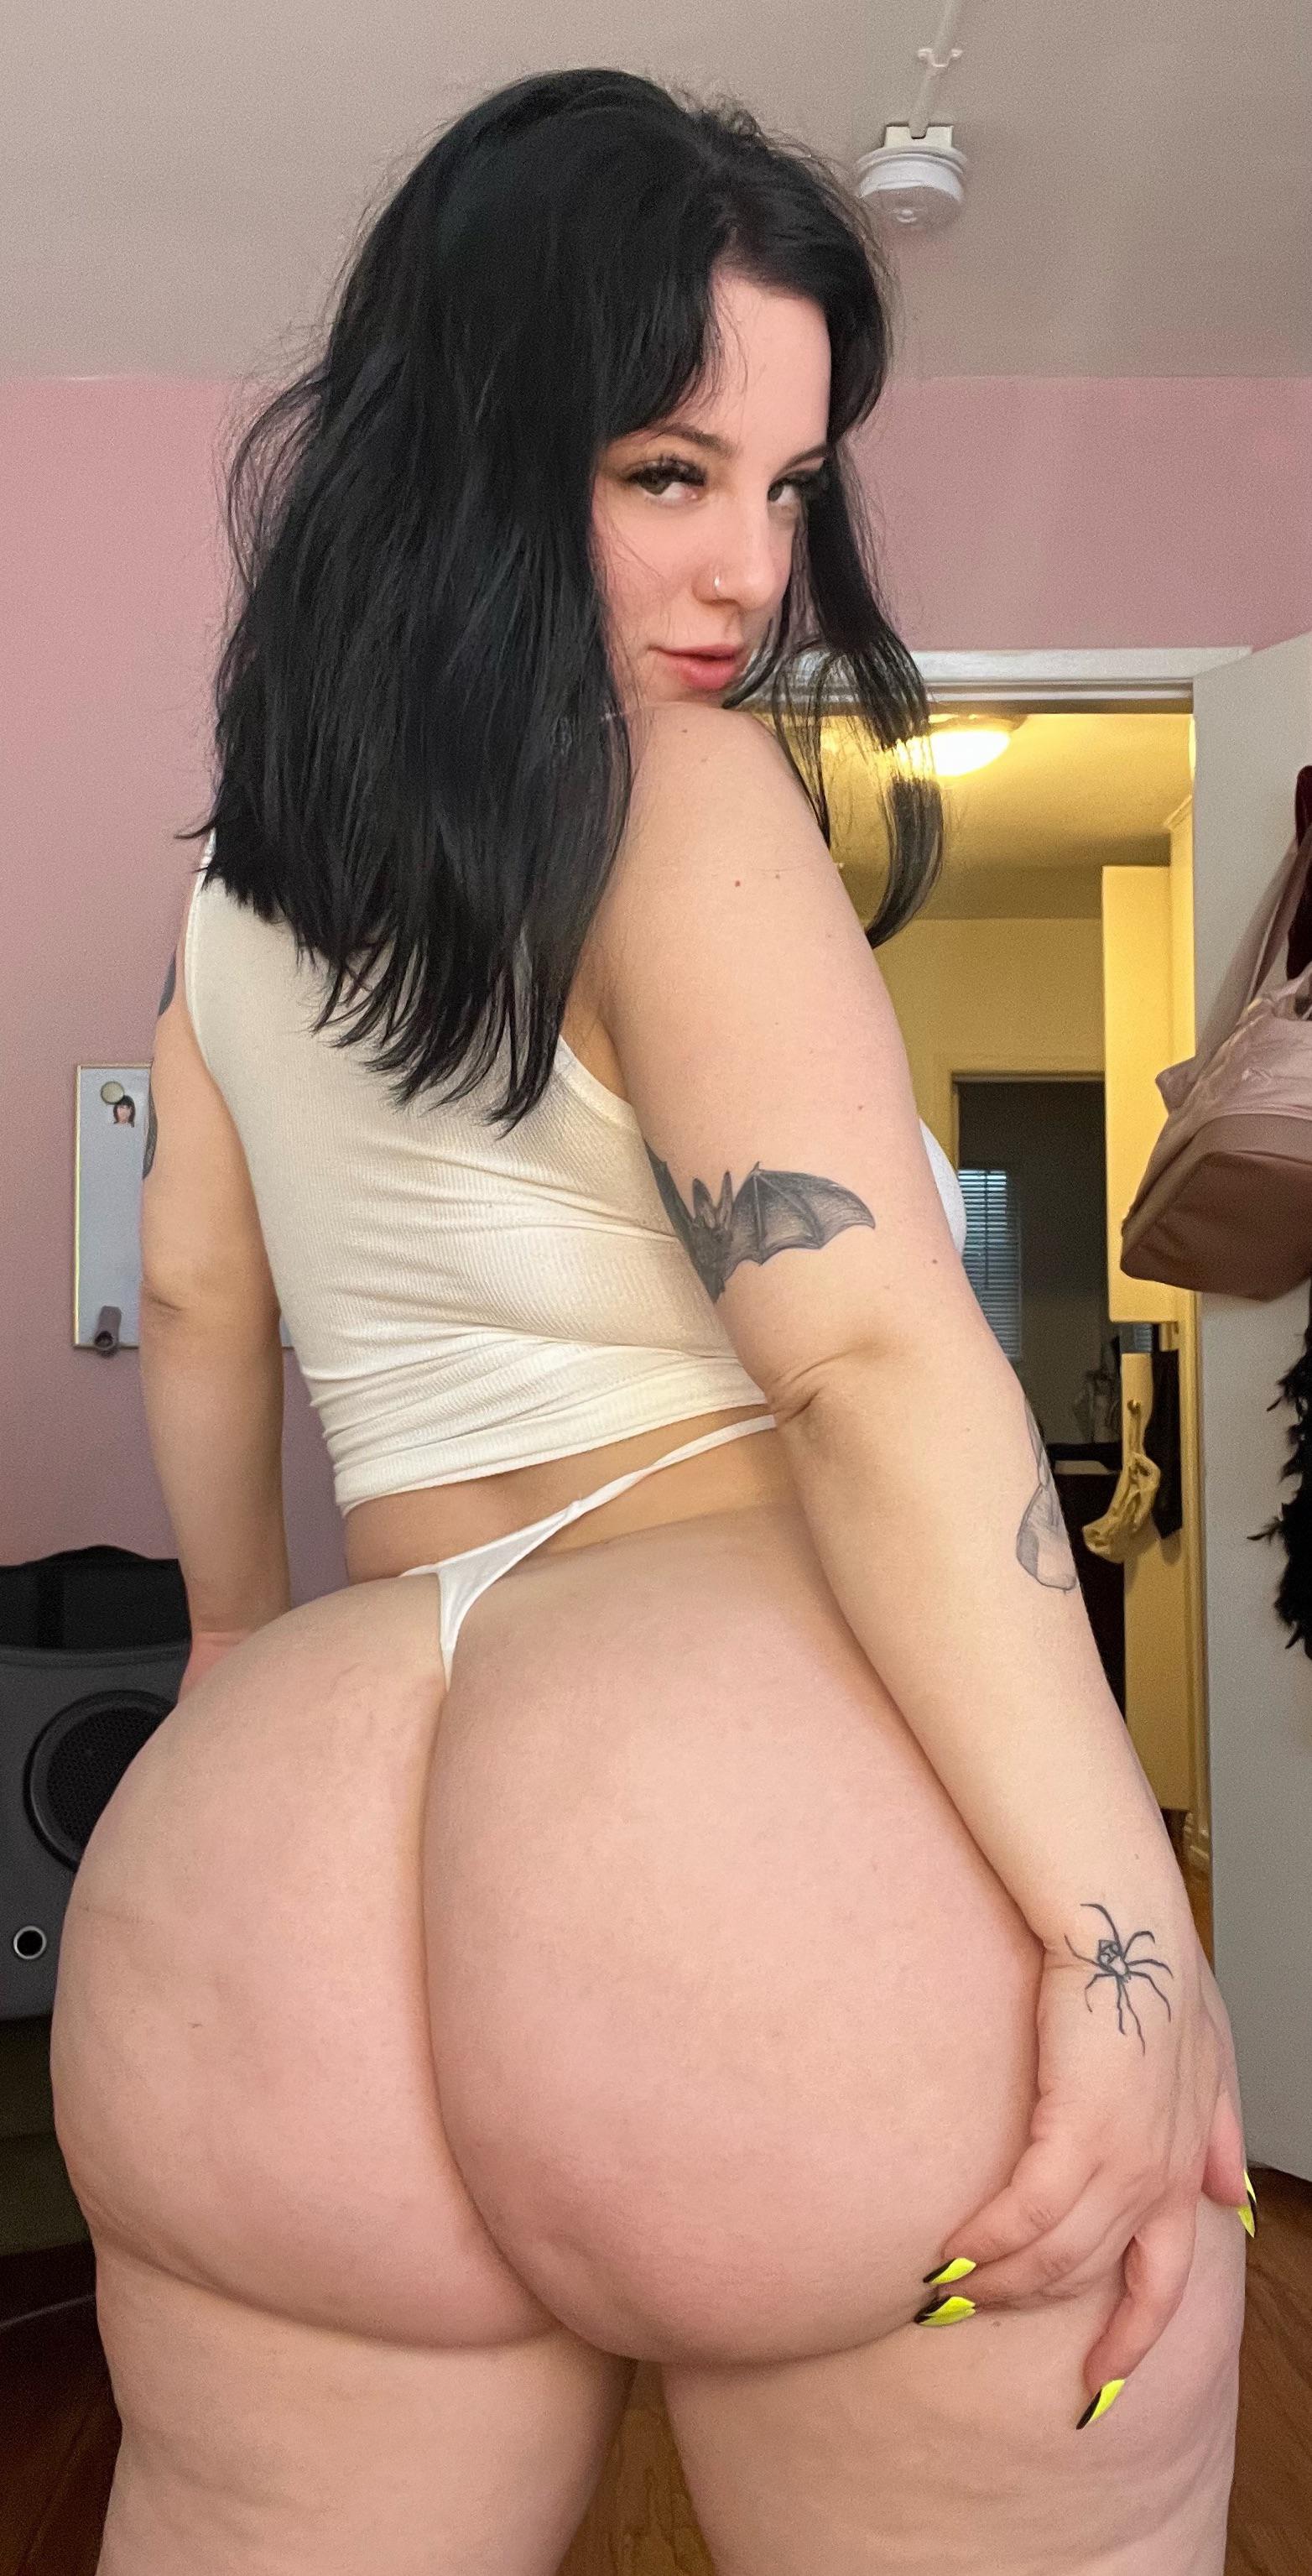 PAWG ass for days